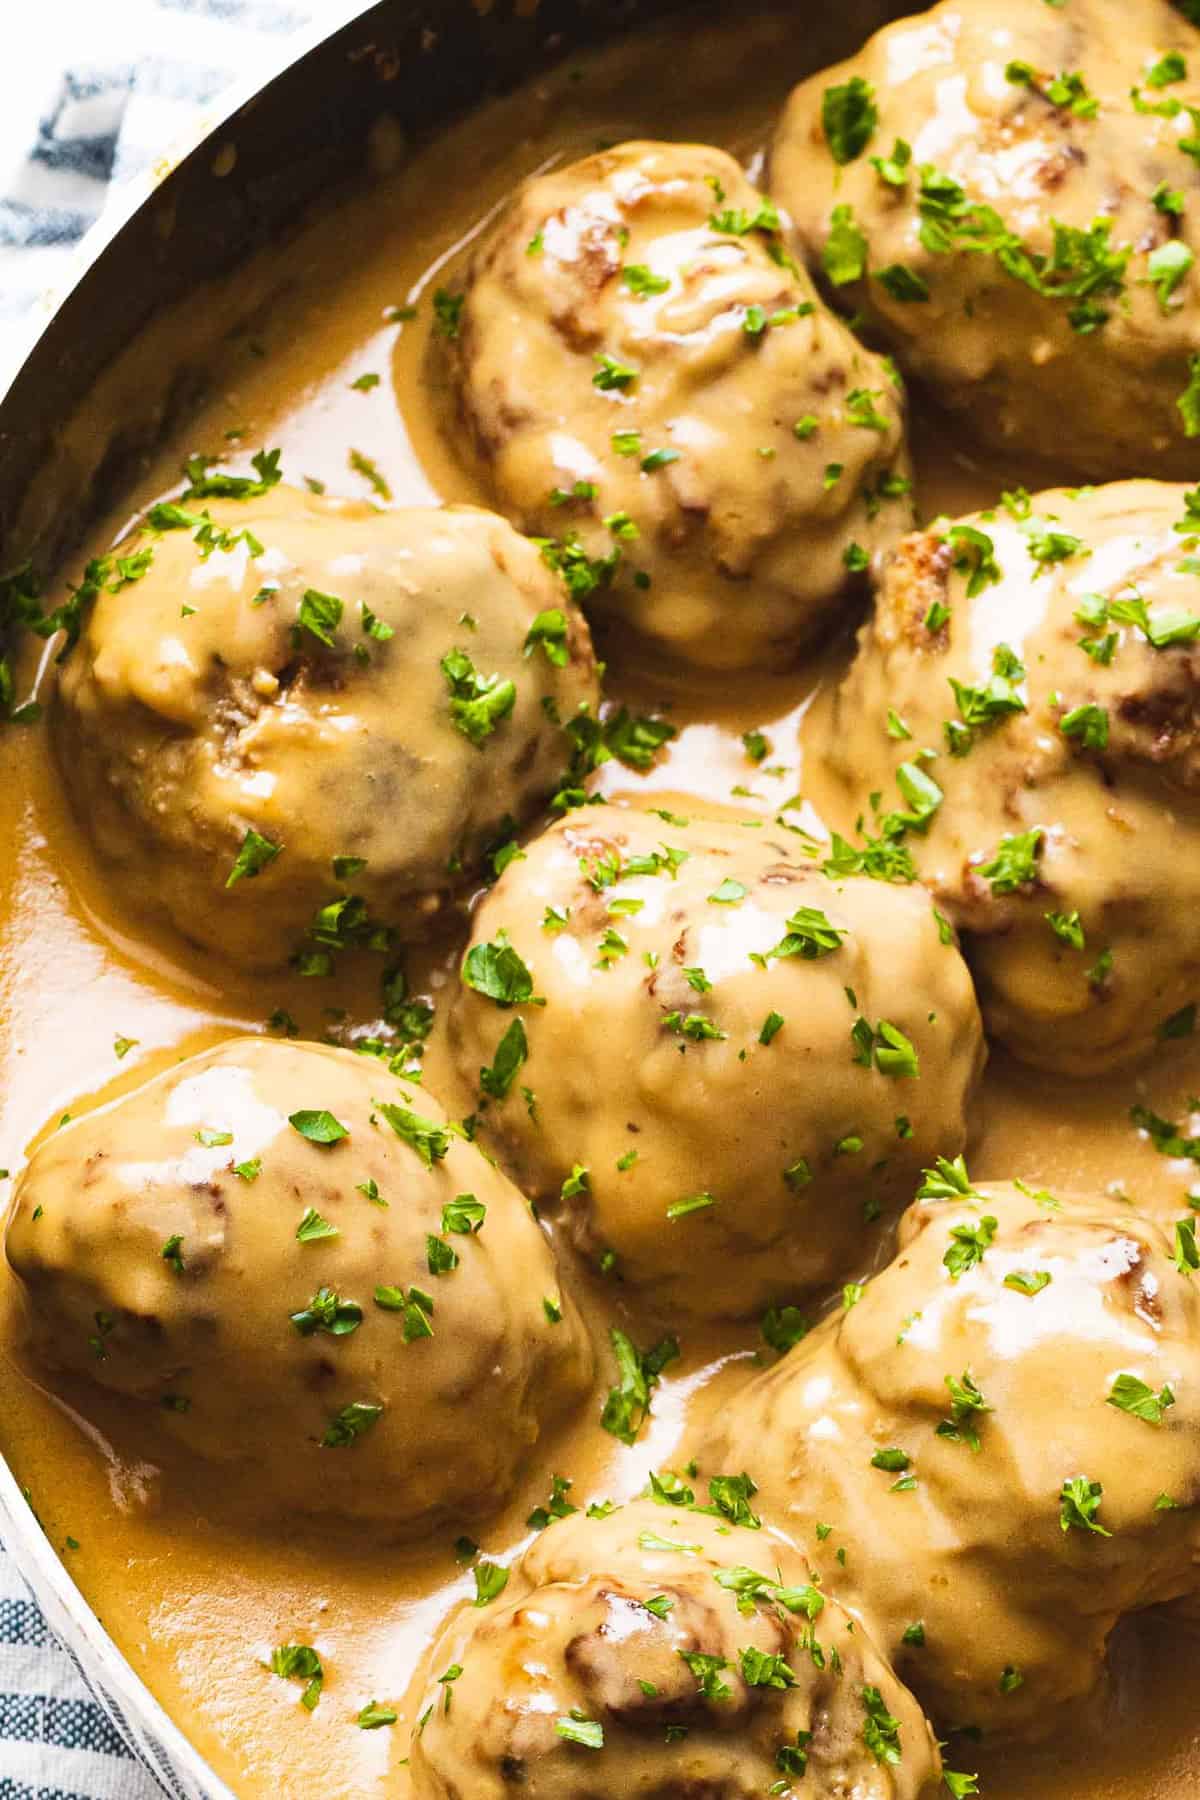 Swedish meatballs in sauce with garnish of chopped parsley.